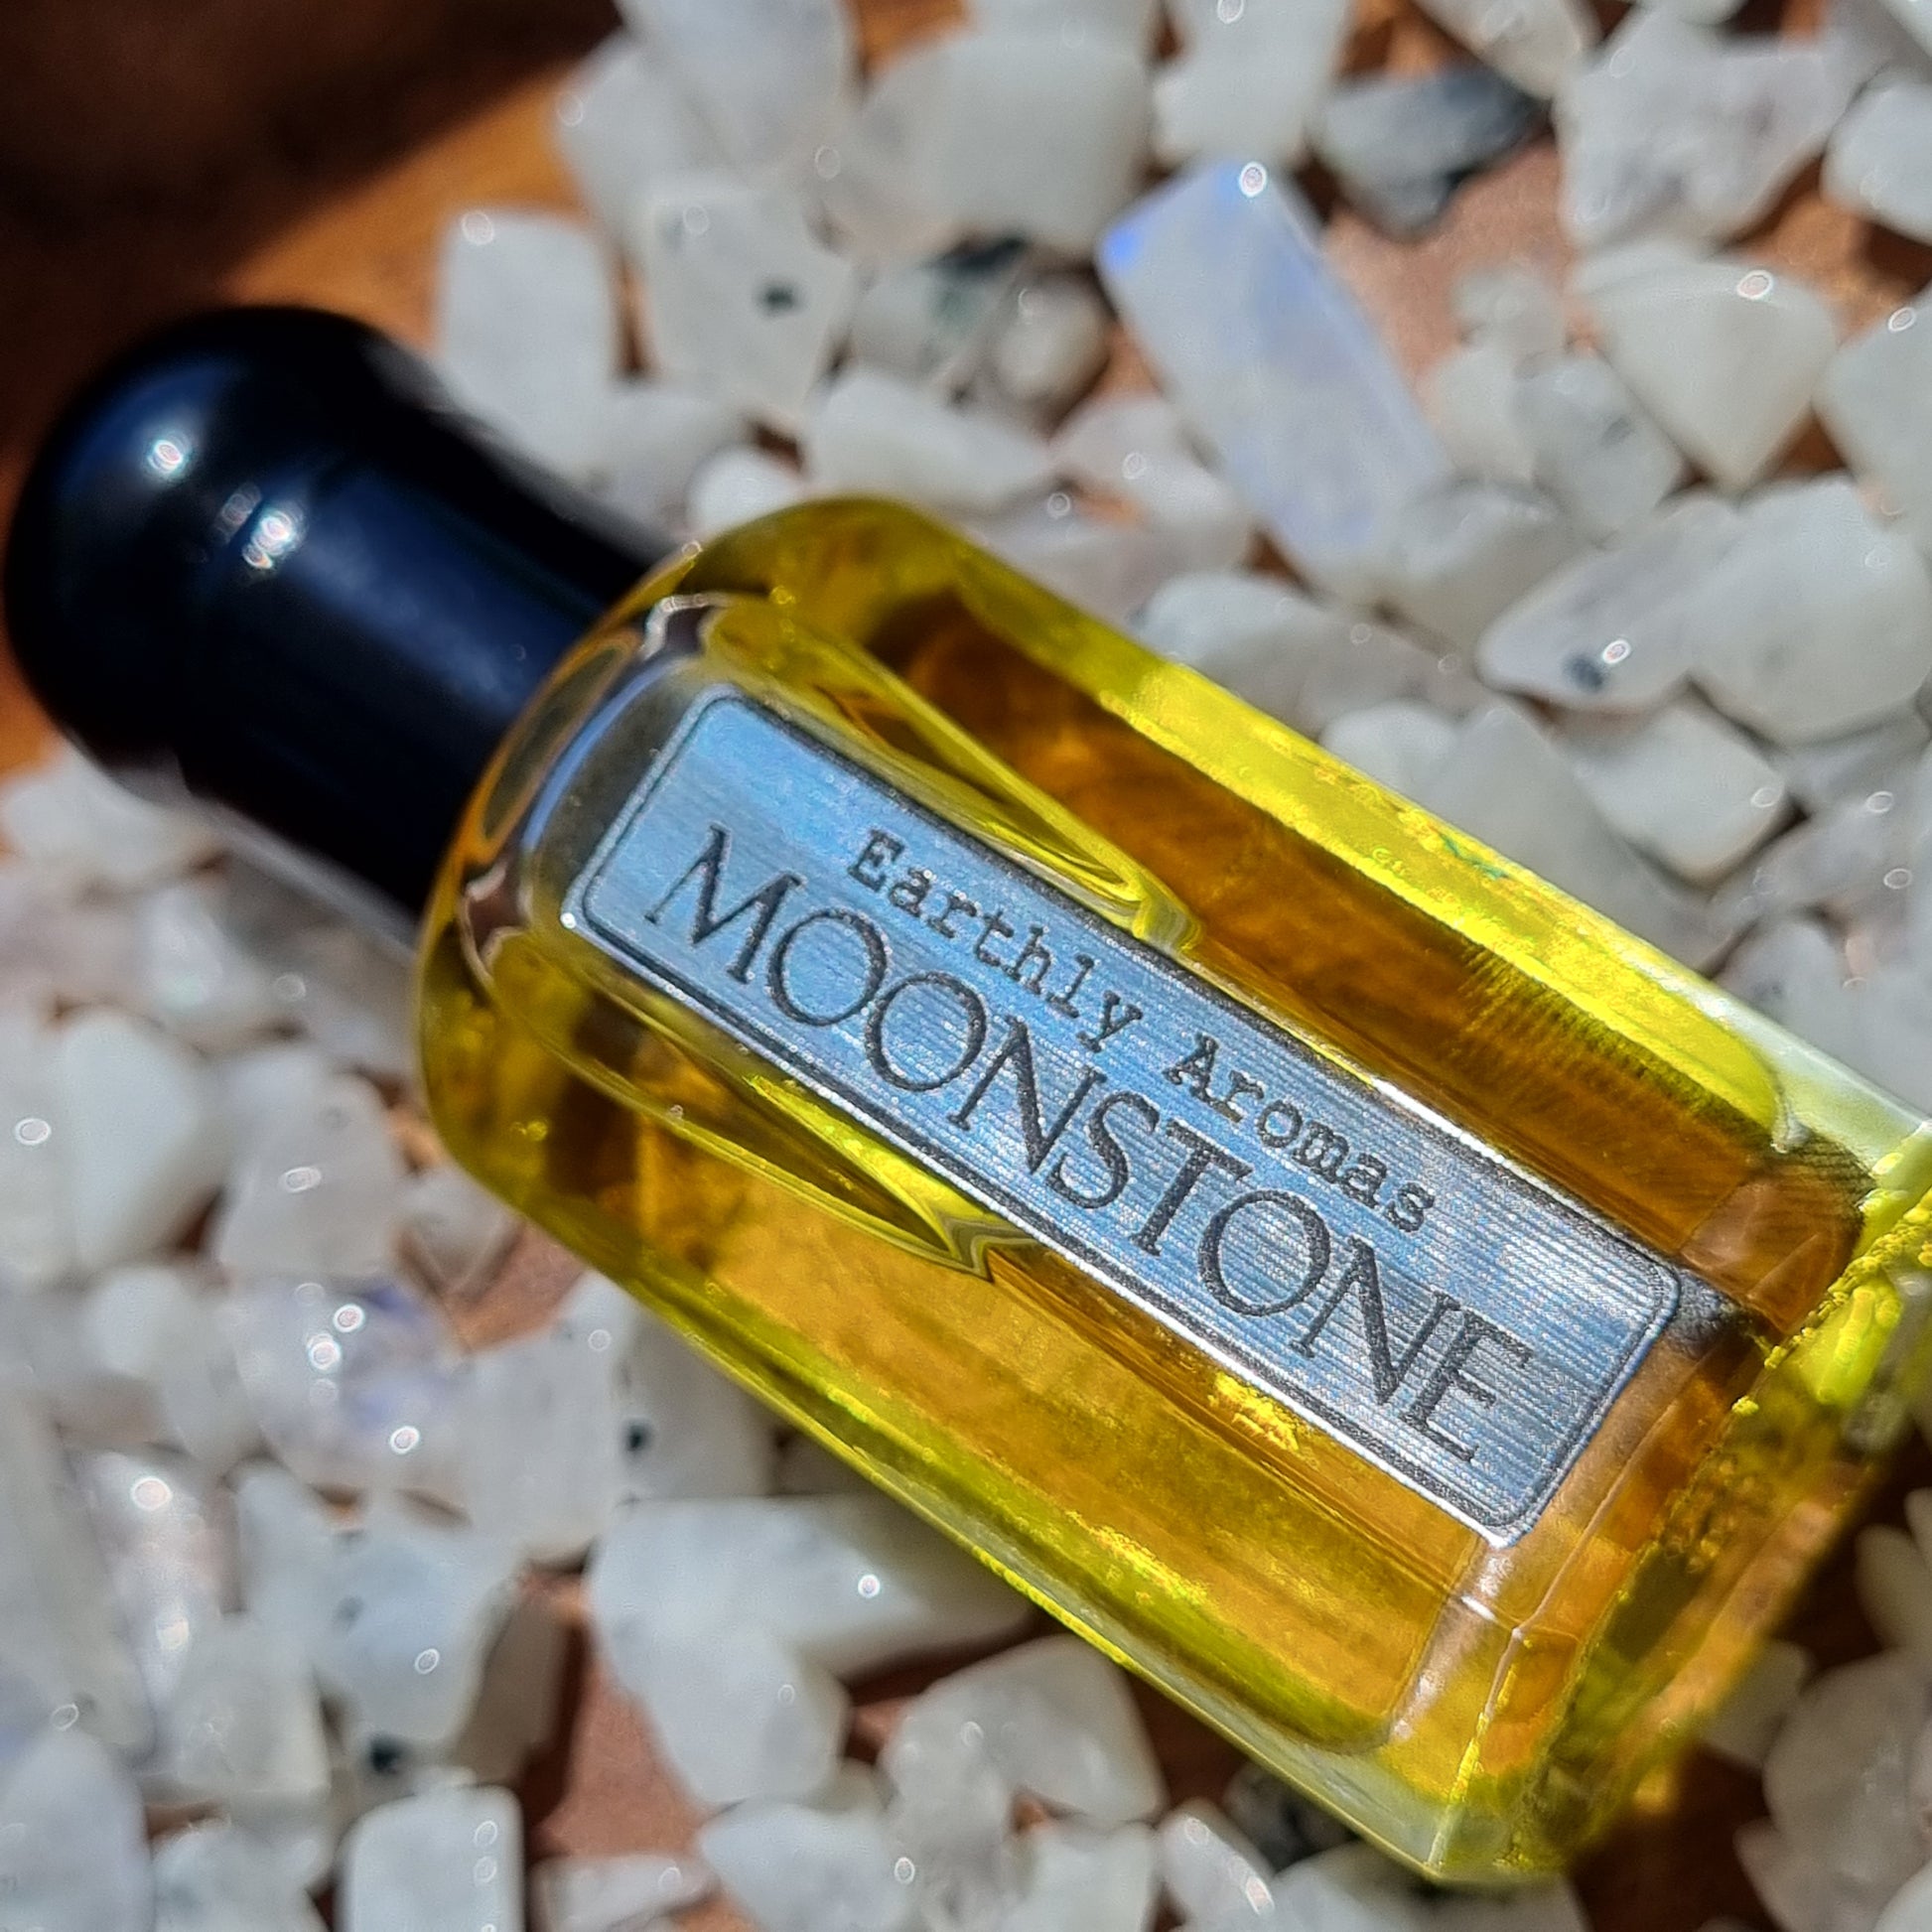 Moonstone Scented Roll On Perfume Oil - Sparrow and Fox